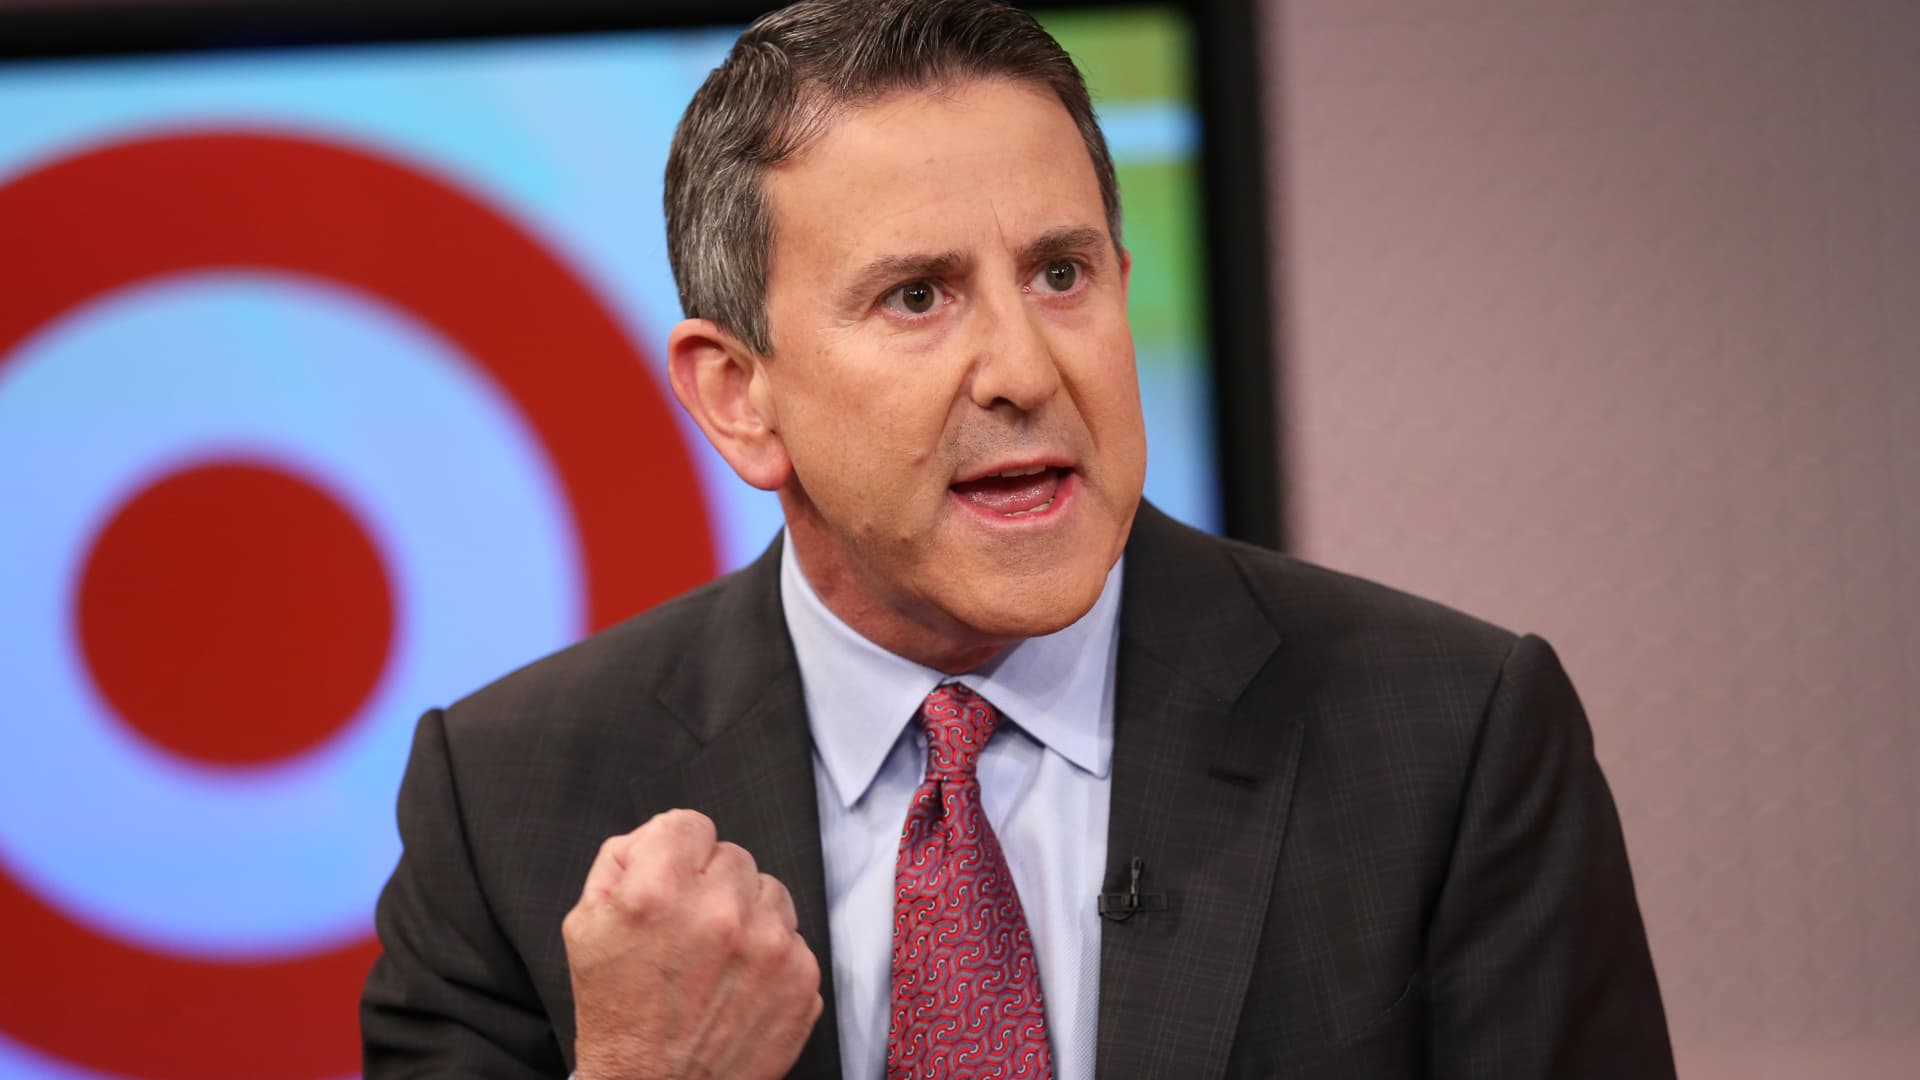 How Target’s CEO gives his 'very best' every day: I sleep and eat like I’m 'playing in the U.S. Open or Super Bowl'